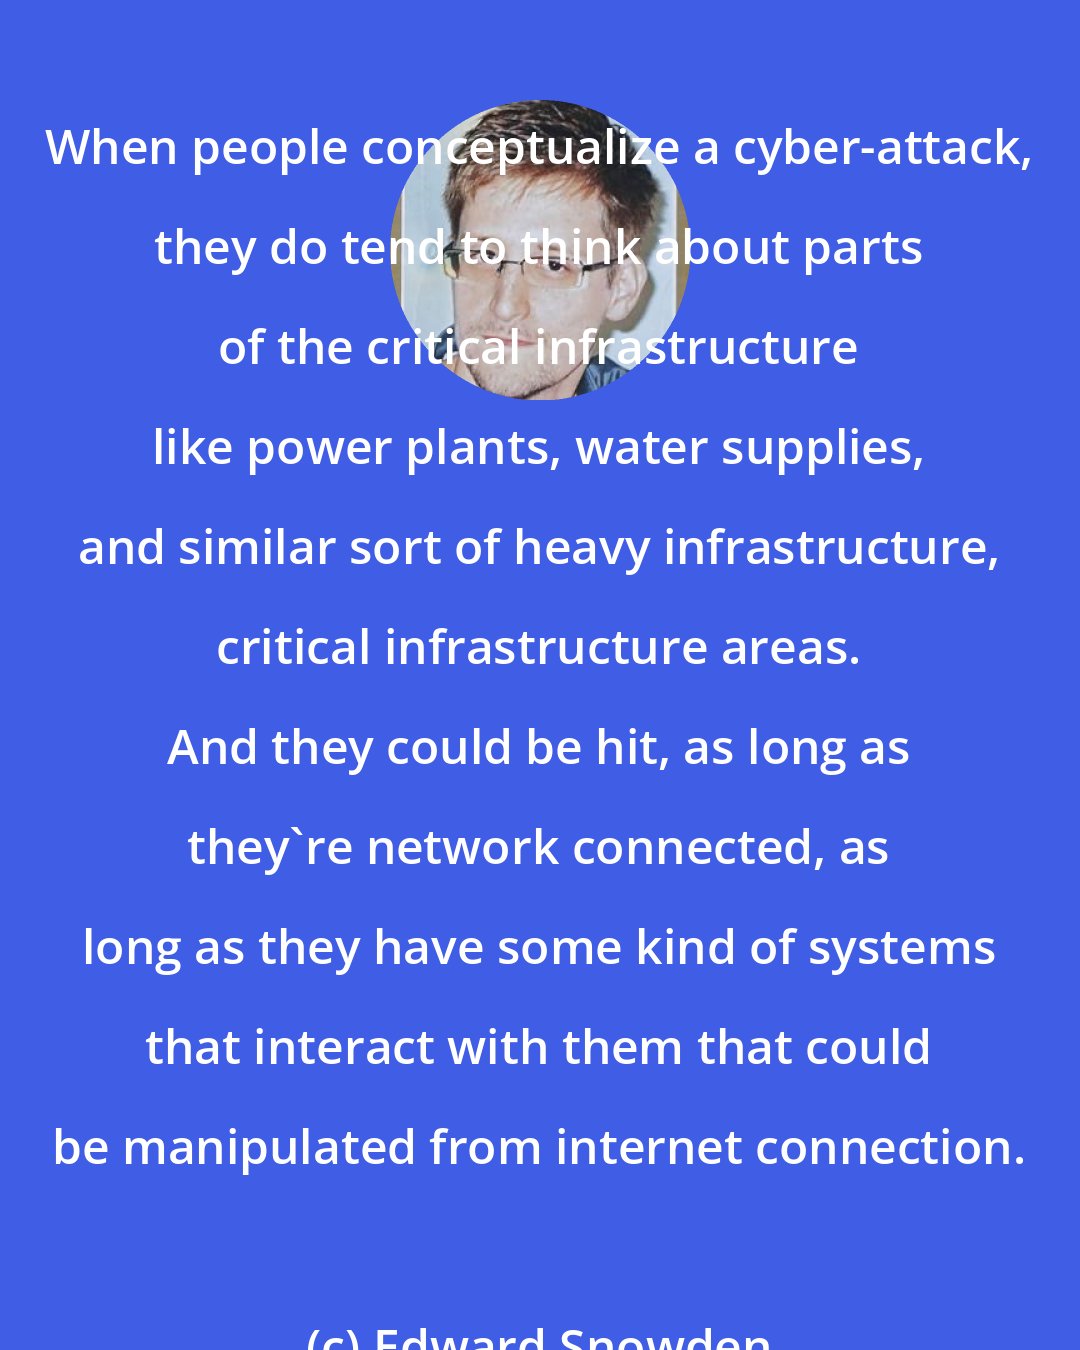 Edward Snowden: When people conceptualize a cyber-attack, they do tend to think about parts of the critical infrastructure like power plants, water supplies, and similar sort of heavy infrastructure, critical infrastructure areas. And they could be hit, as long as they're network connected, as long as they have some kind of systems that interact with them that could be manipulated from internet connection.